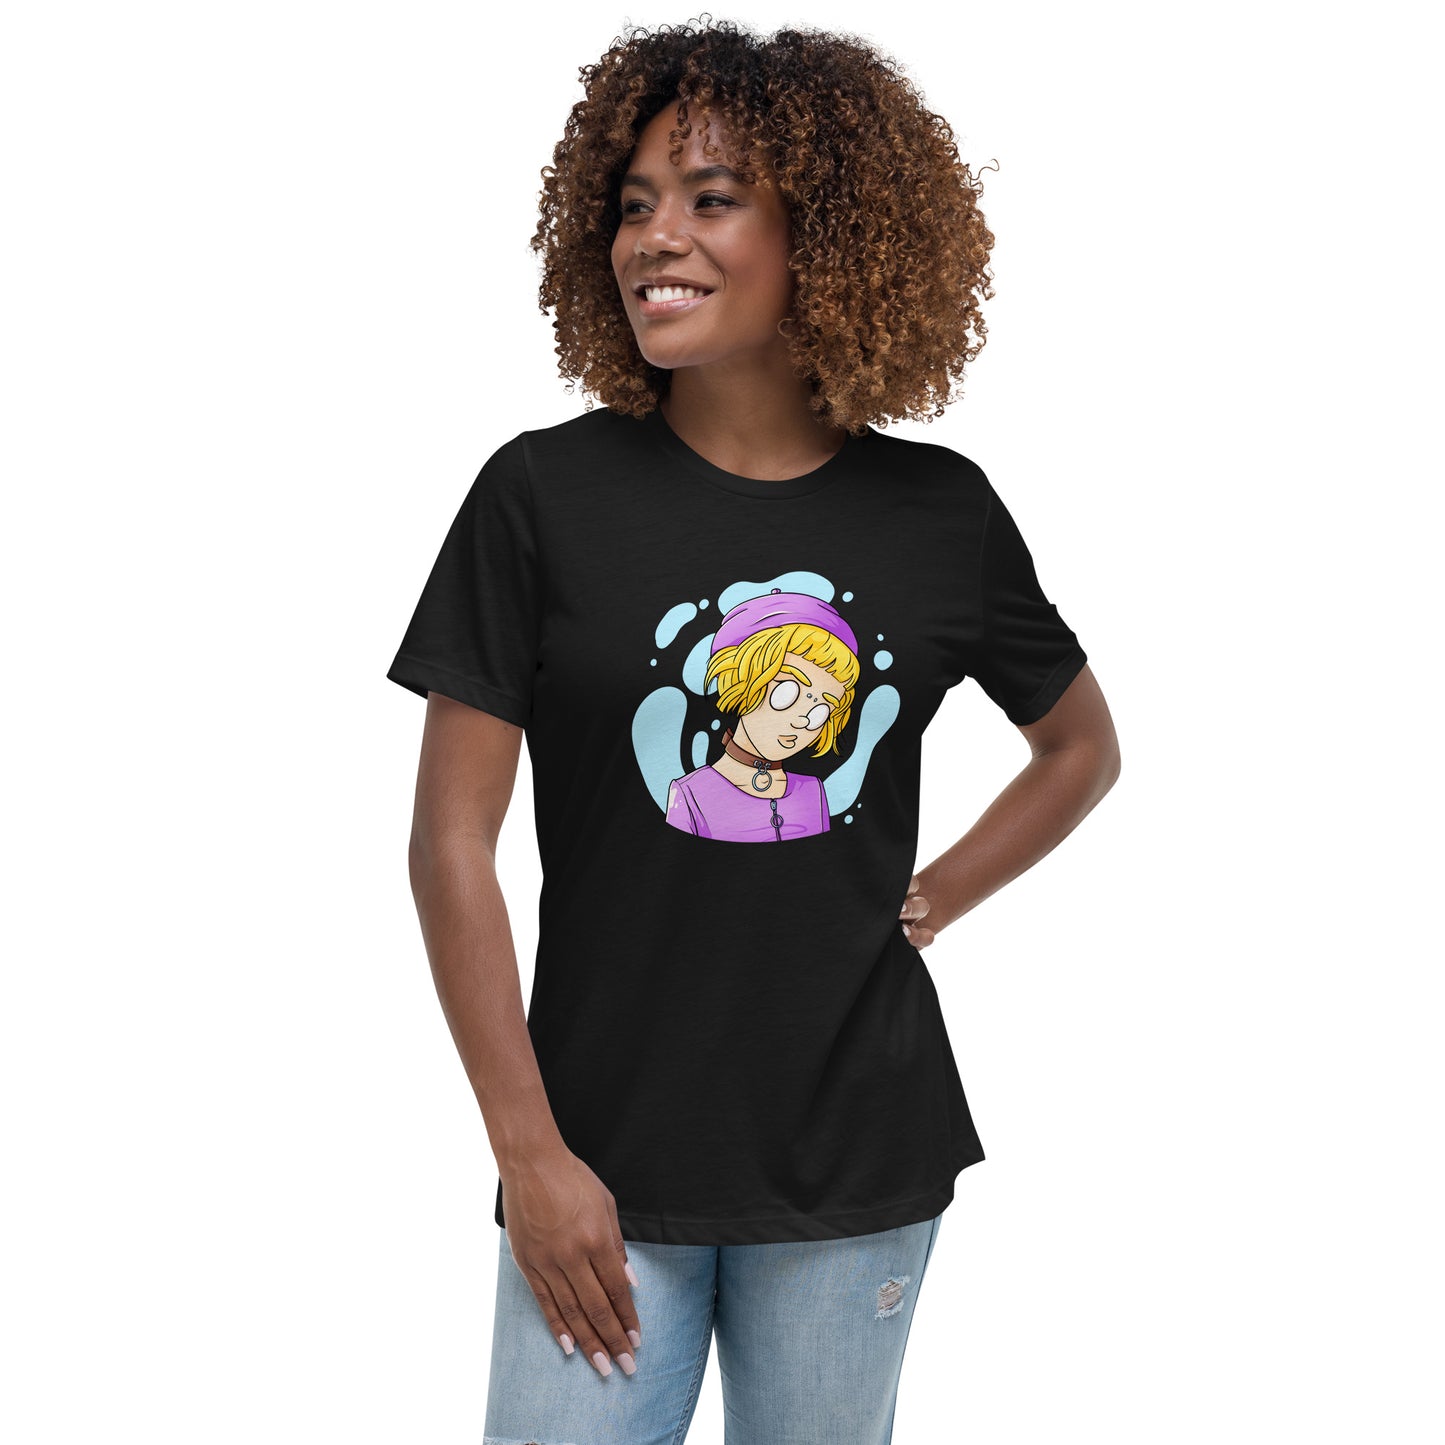 womens-relaxed-tshirt-zombie-mode-black